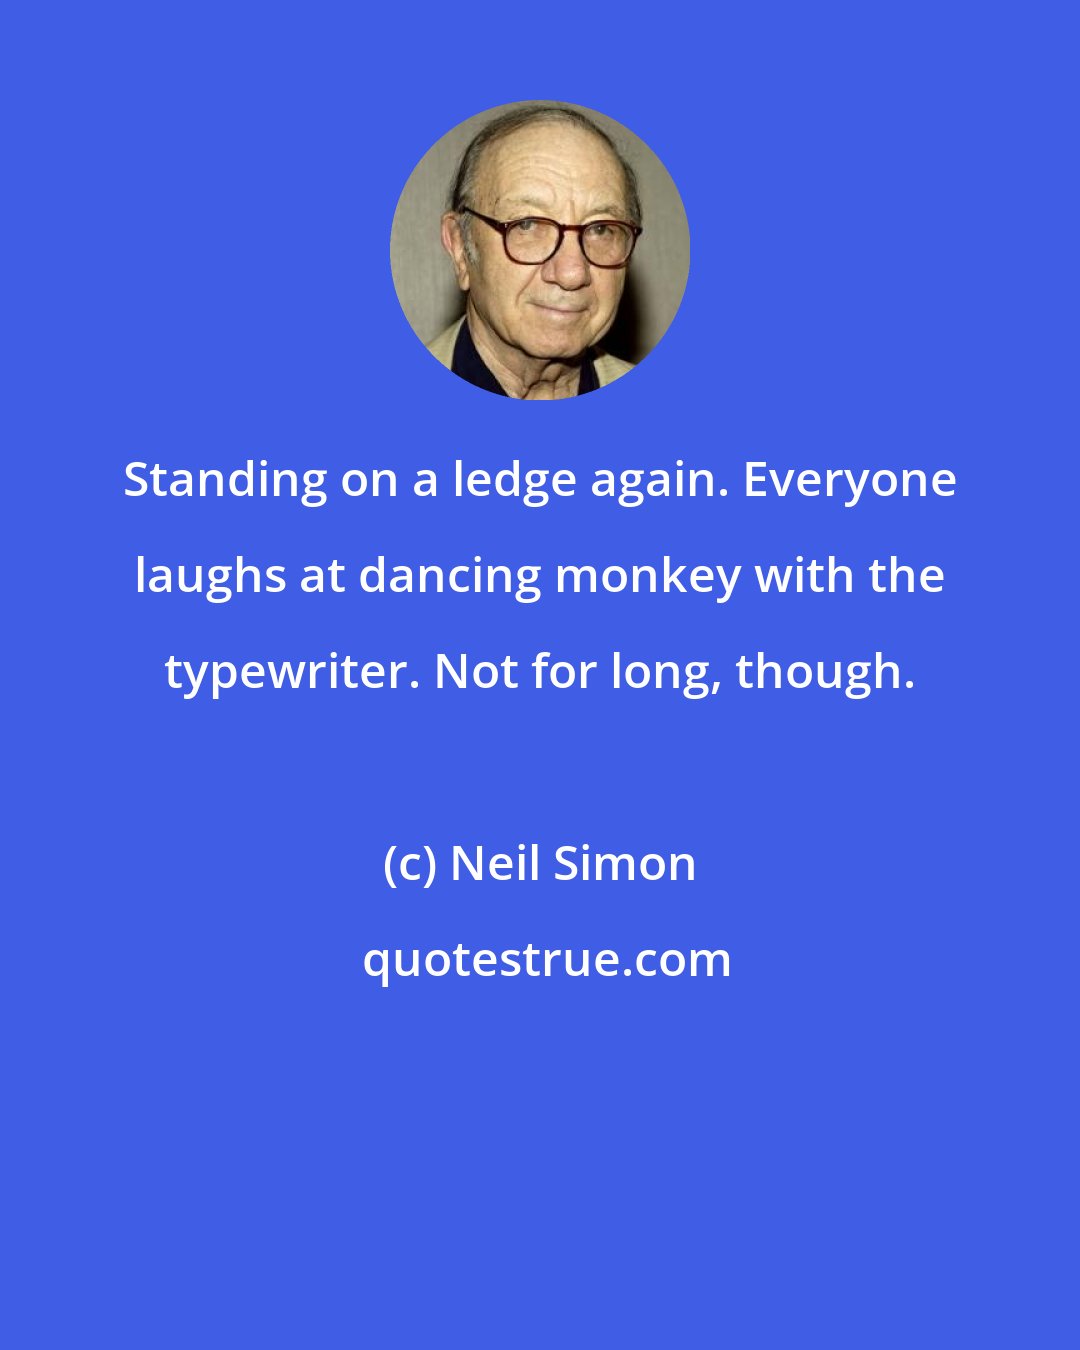 Neil Simon: Standing on a ledge again. Everyone laughs at dancing monkey with the typewriter. Not for long, though.